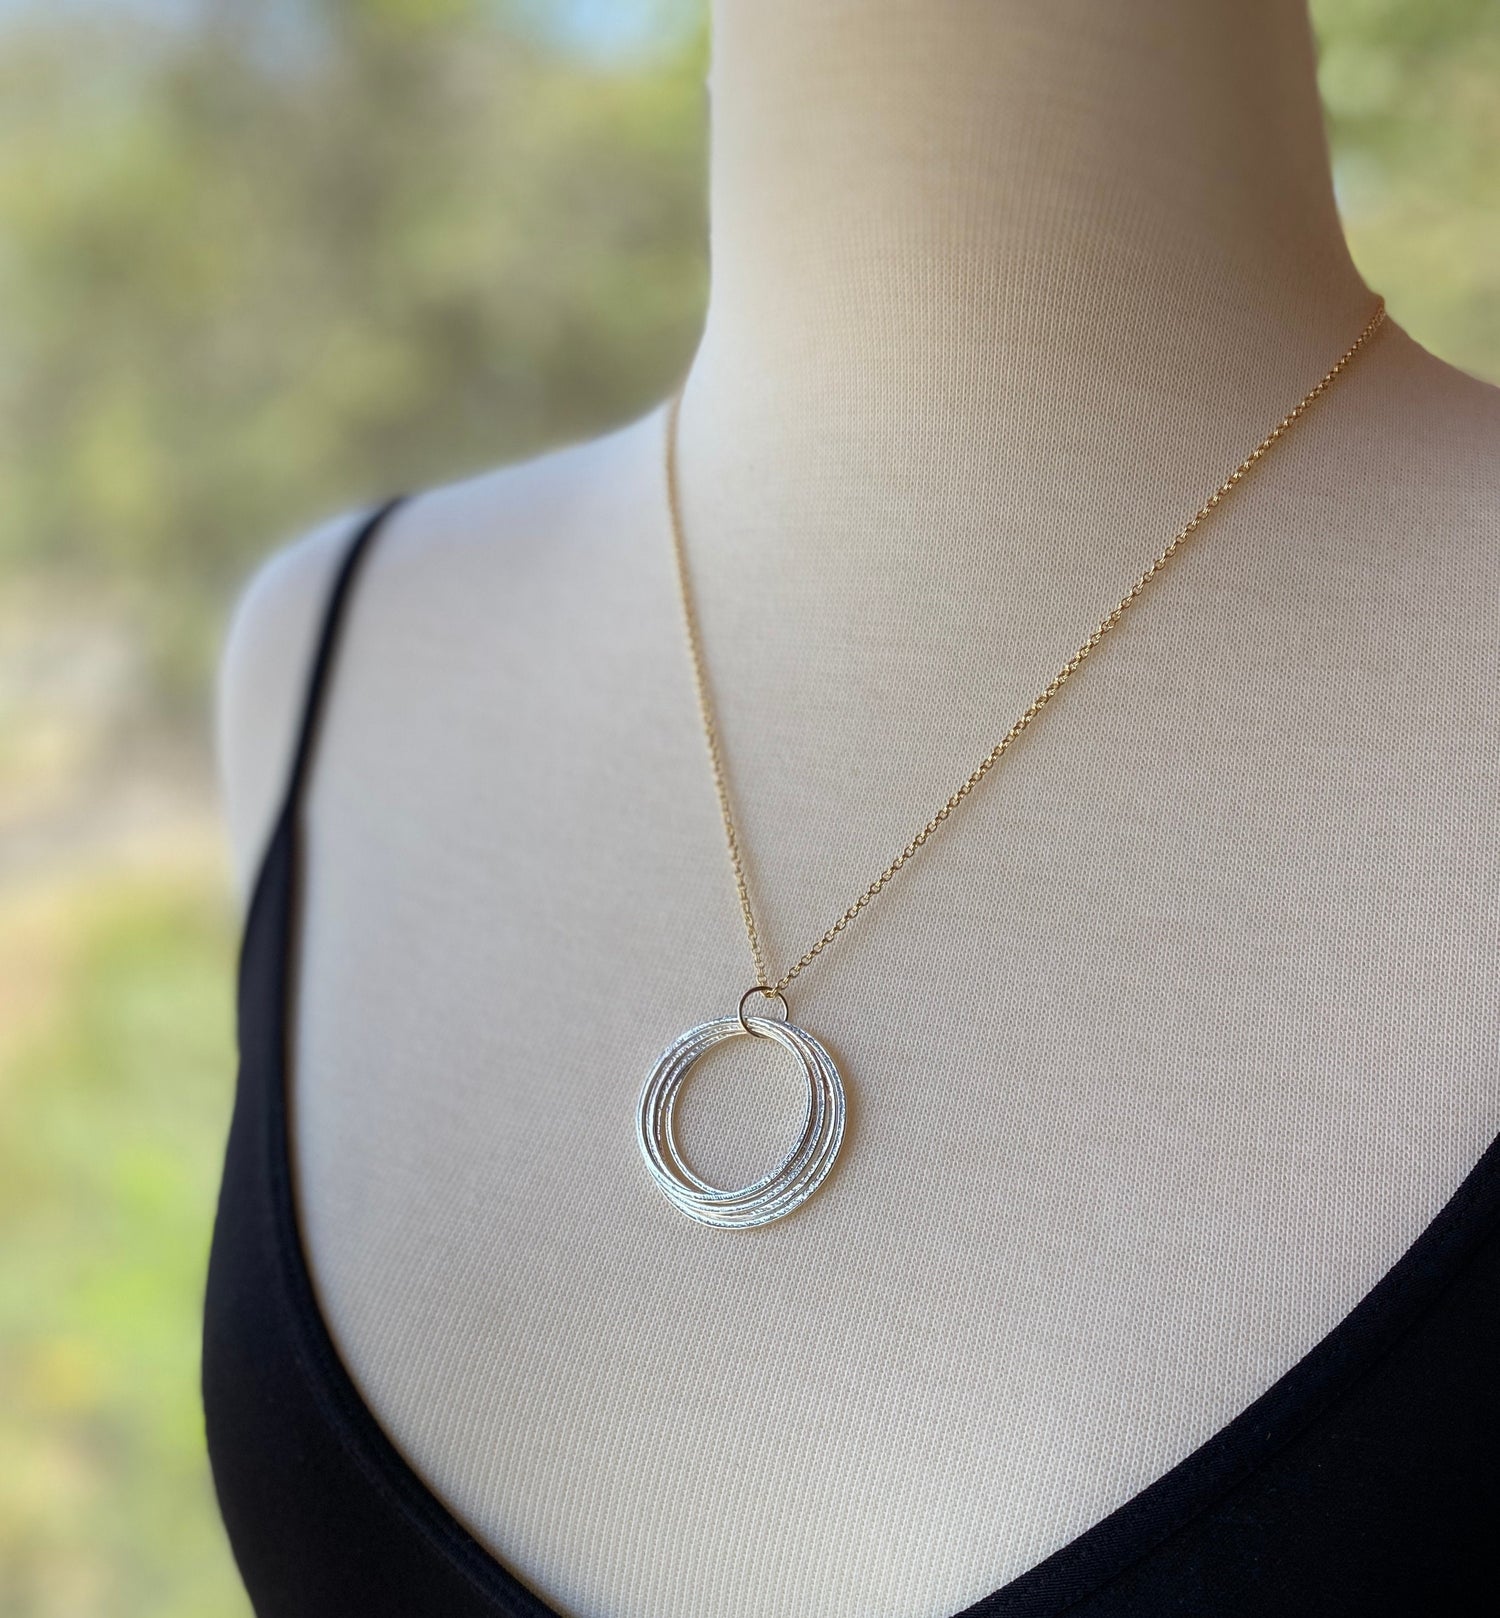 60th Birthday Mixed Metal Milestone Necklace, Handcrafted Bold Sparkly Circles Perfectly Imperfect Pendant on 14K Gold Filled Chain